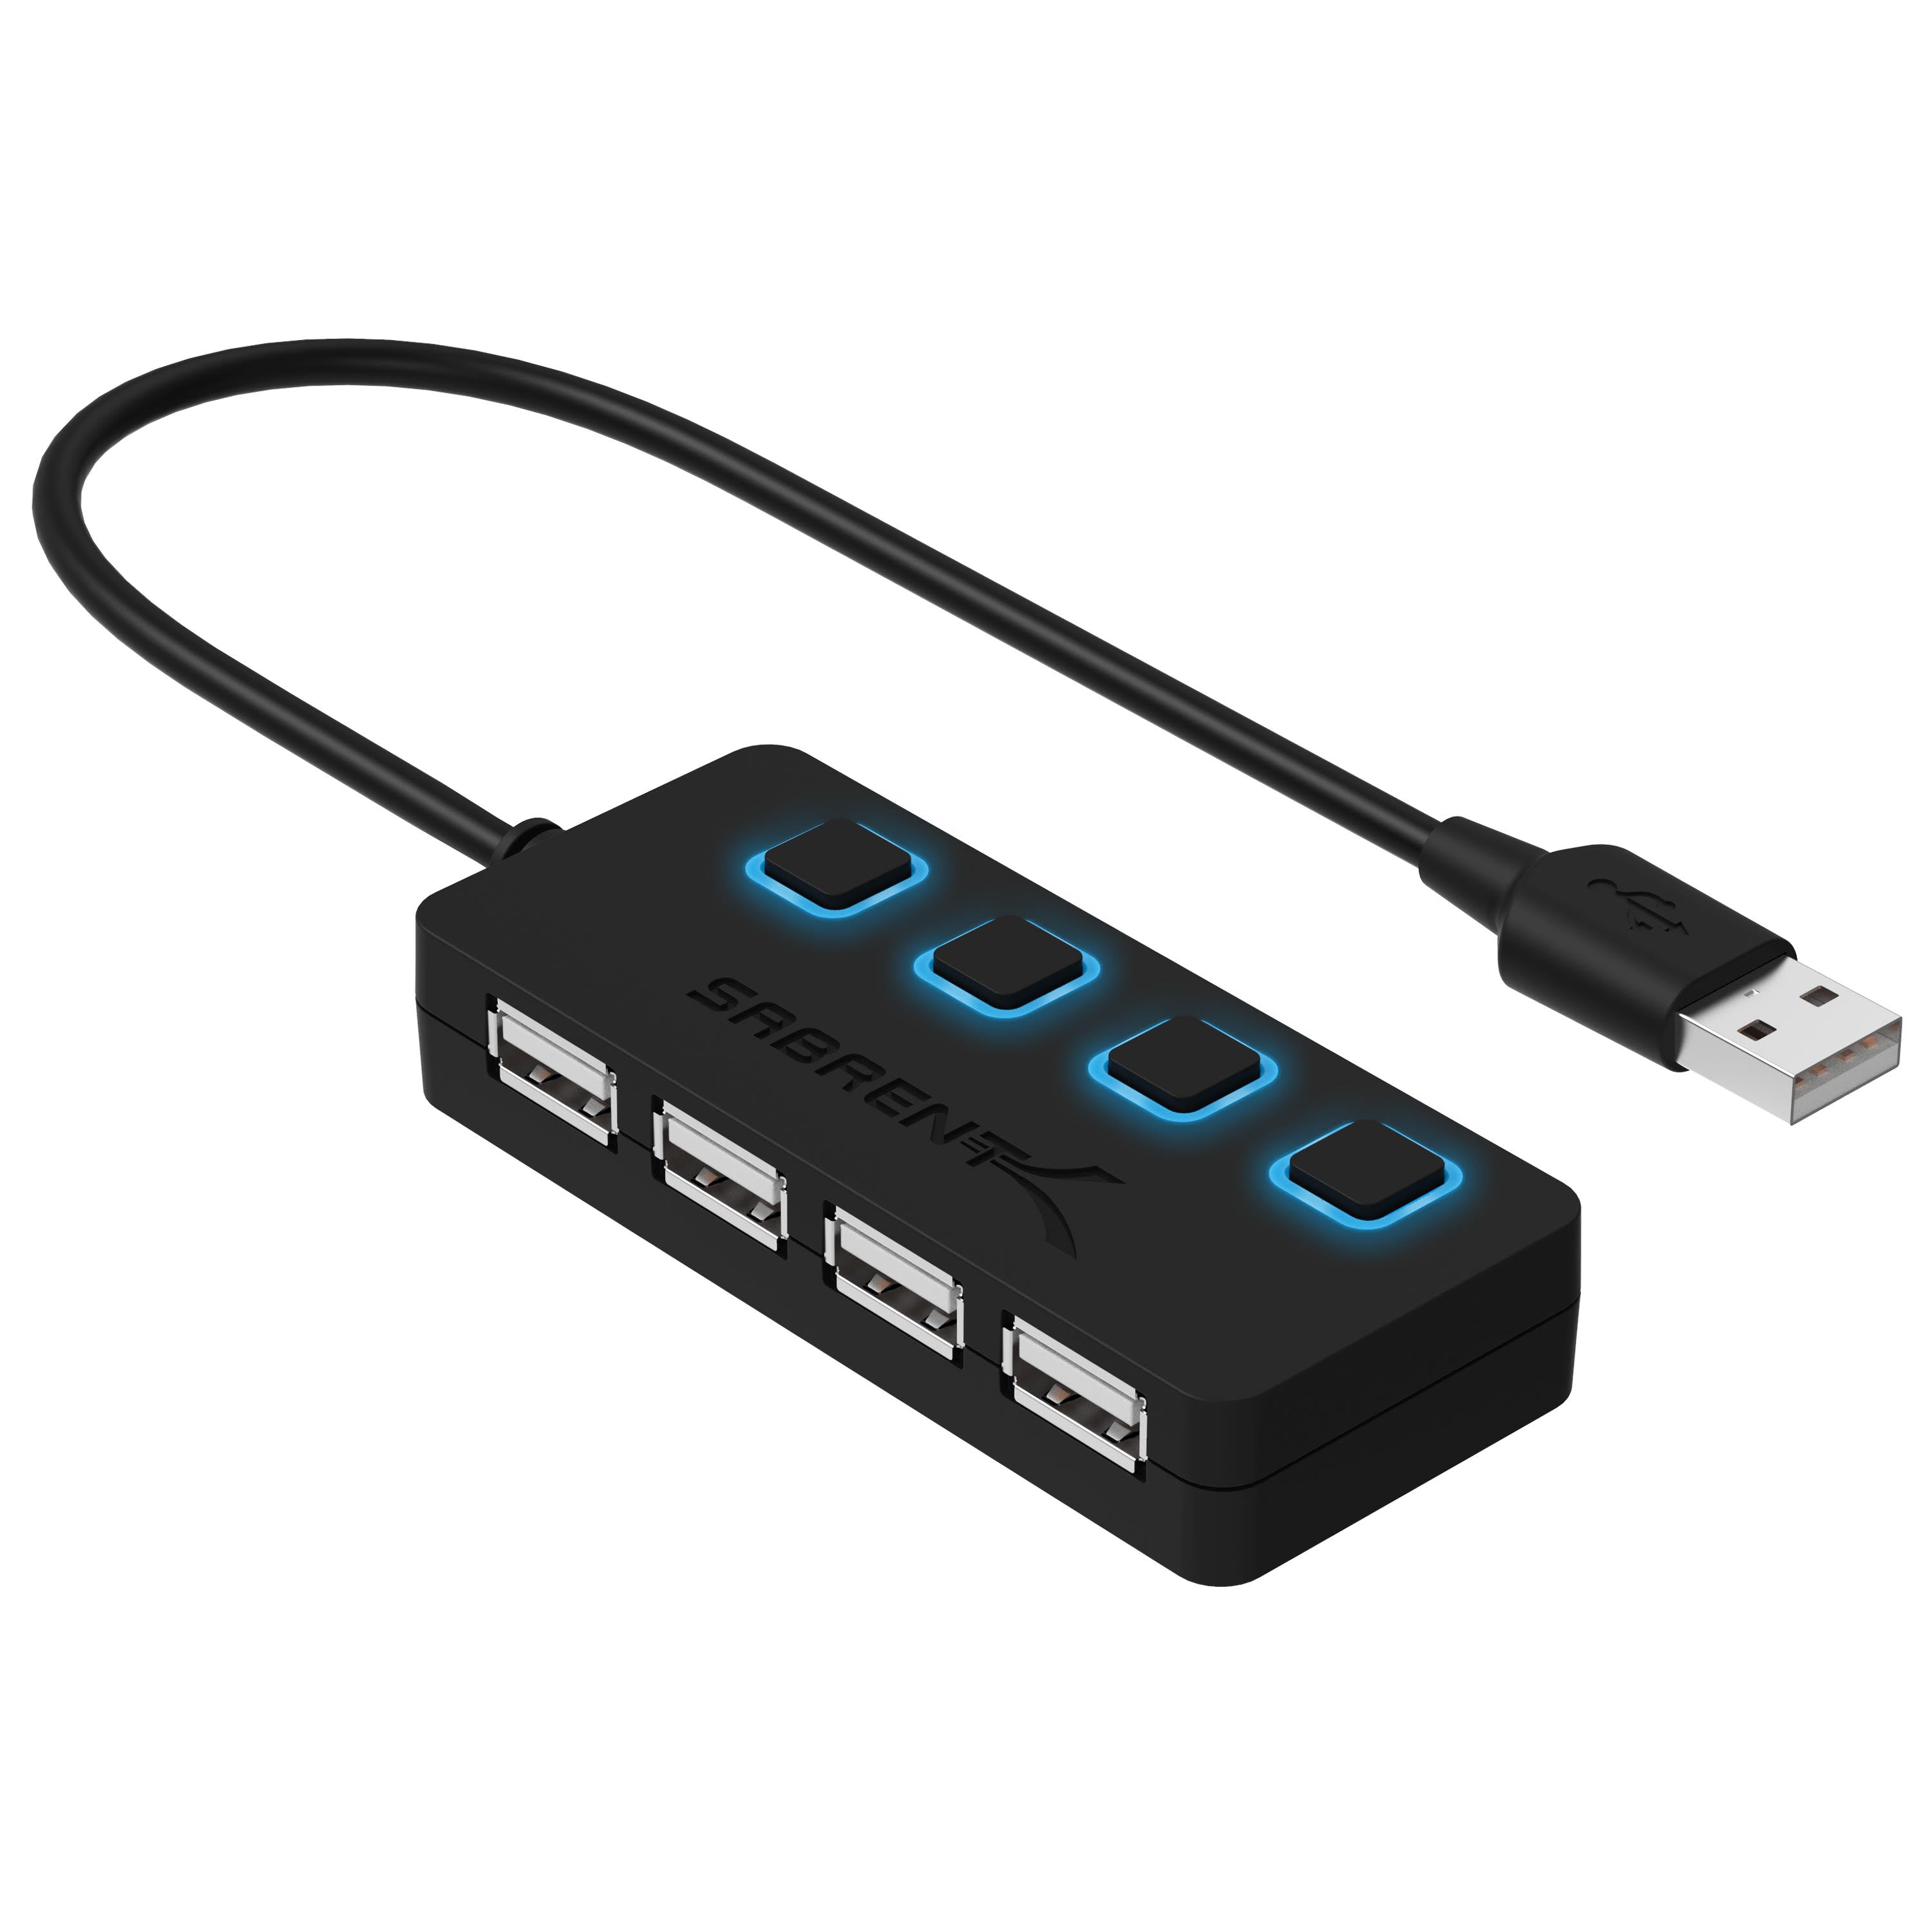 Sabrent HB-UMLS 4-Port USB 2.0 Hub with Power Switches